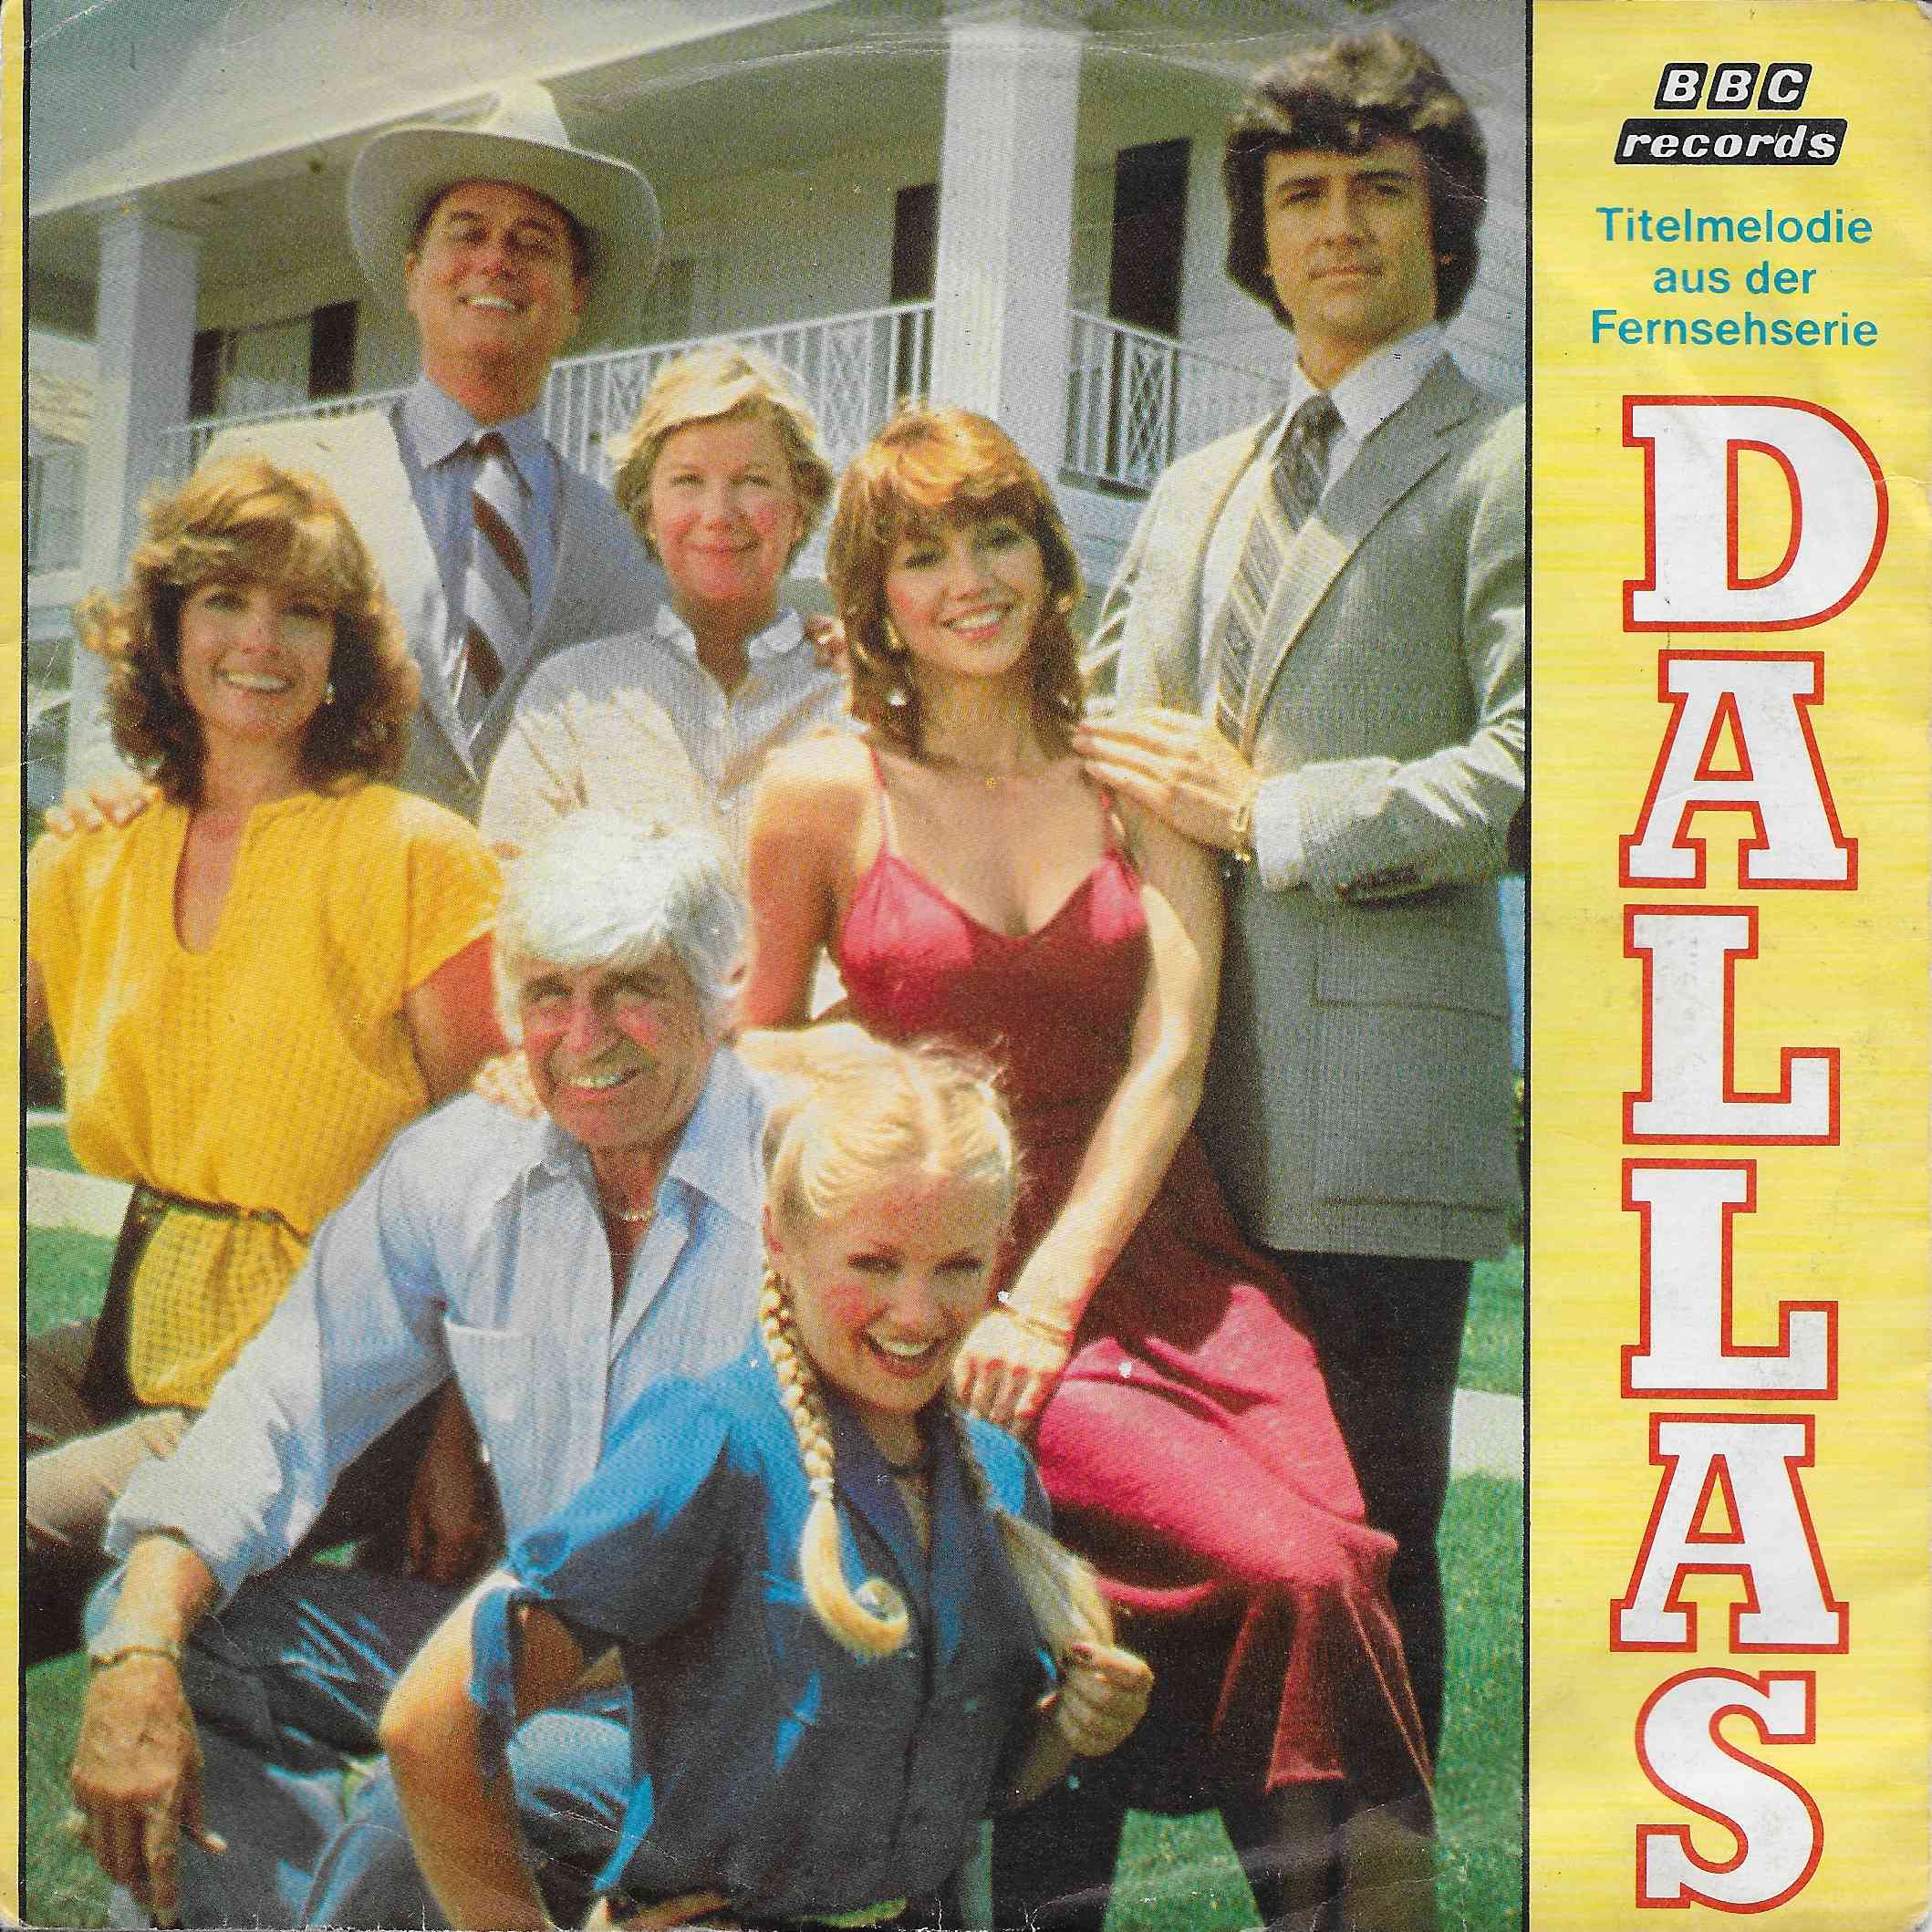 Picture of Dallas by artist Jerrold Immel from the BBC singles - Records and Tapes library